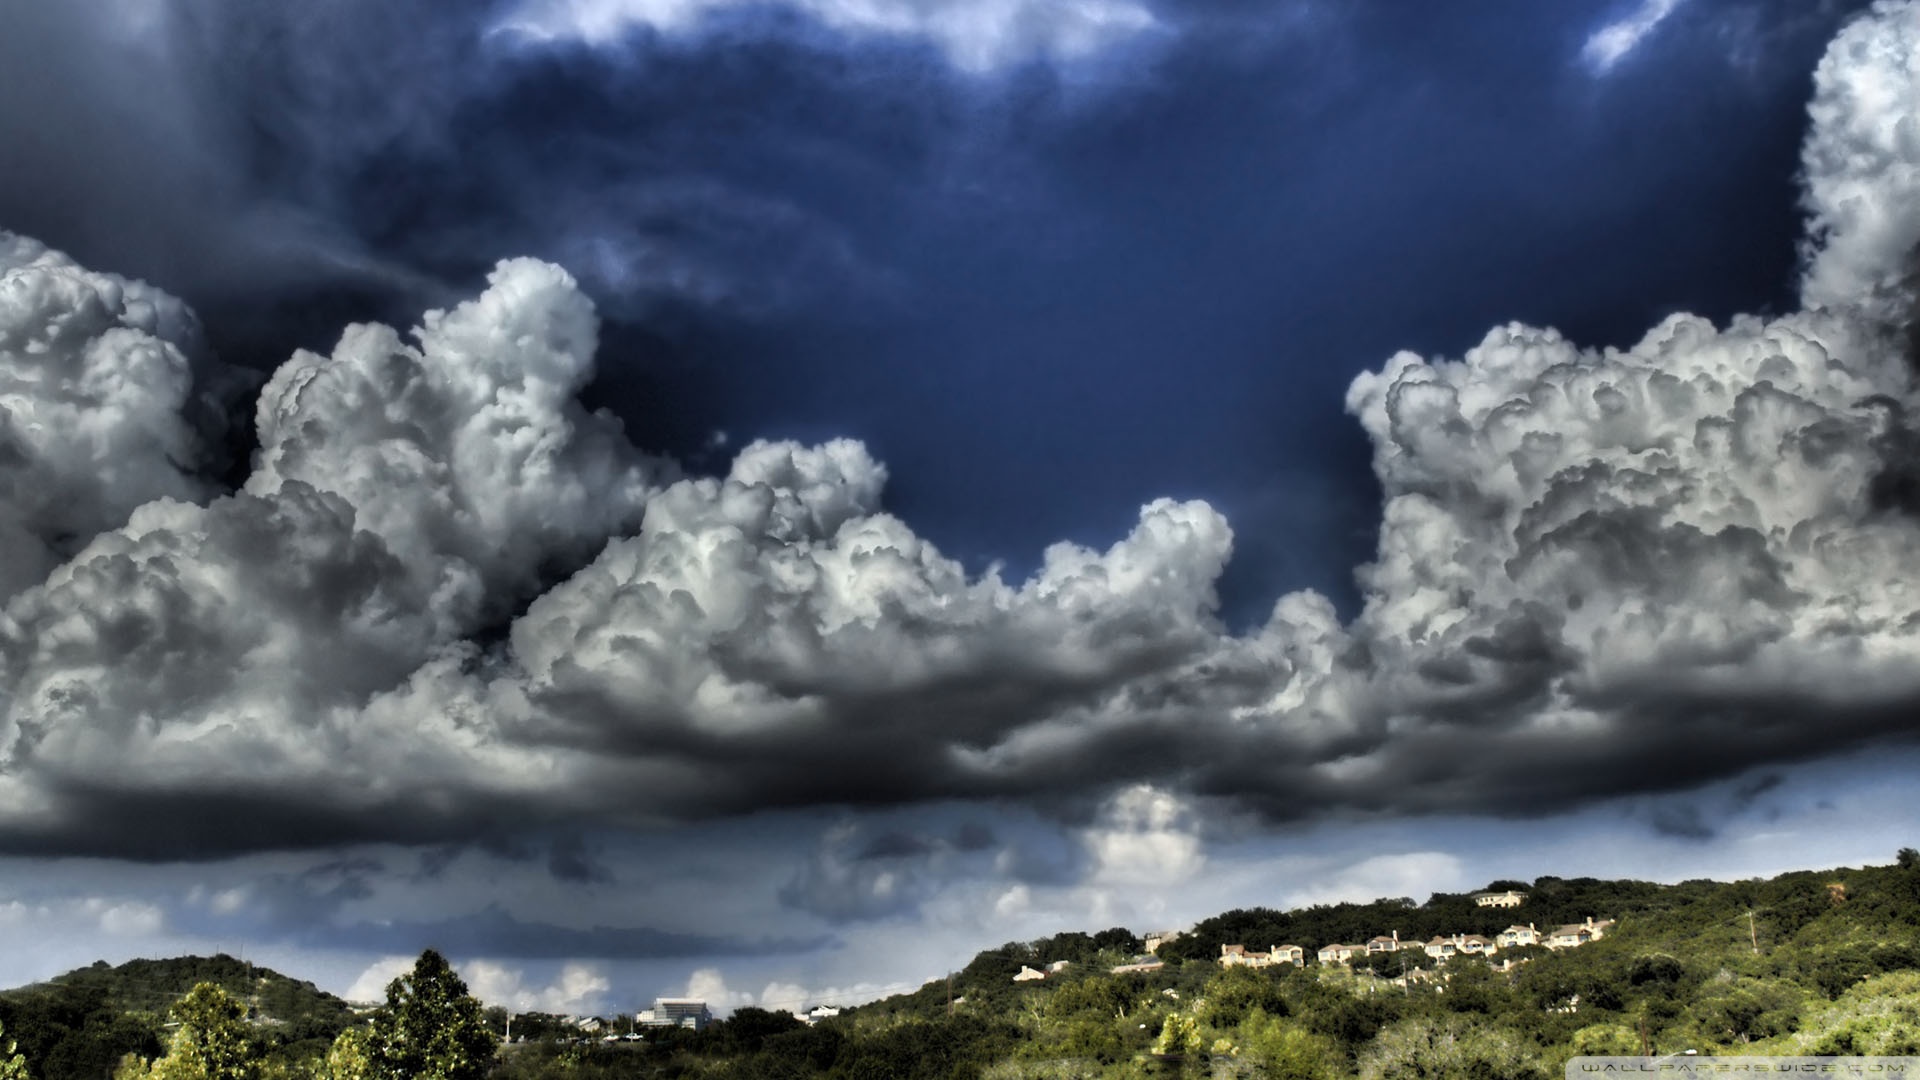 Cloudy Sky Hdr Wallpaper 1920x1080 Cloudy Sky Hdr